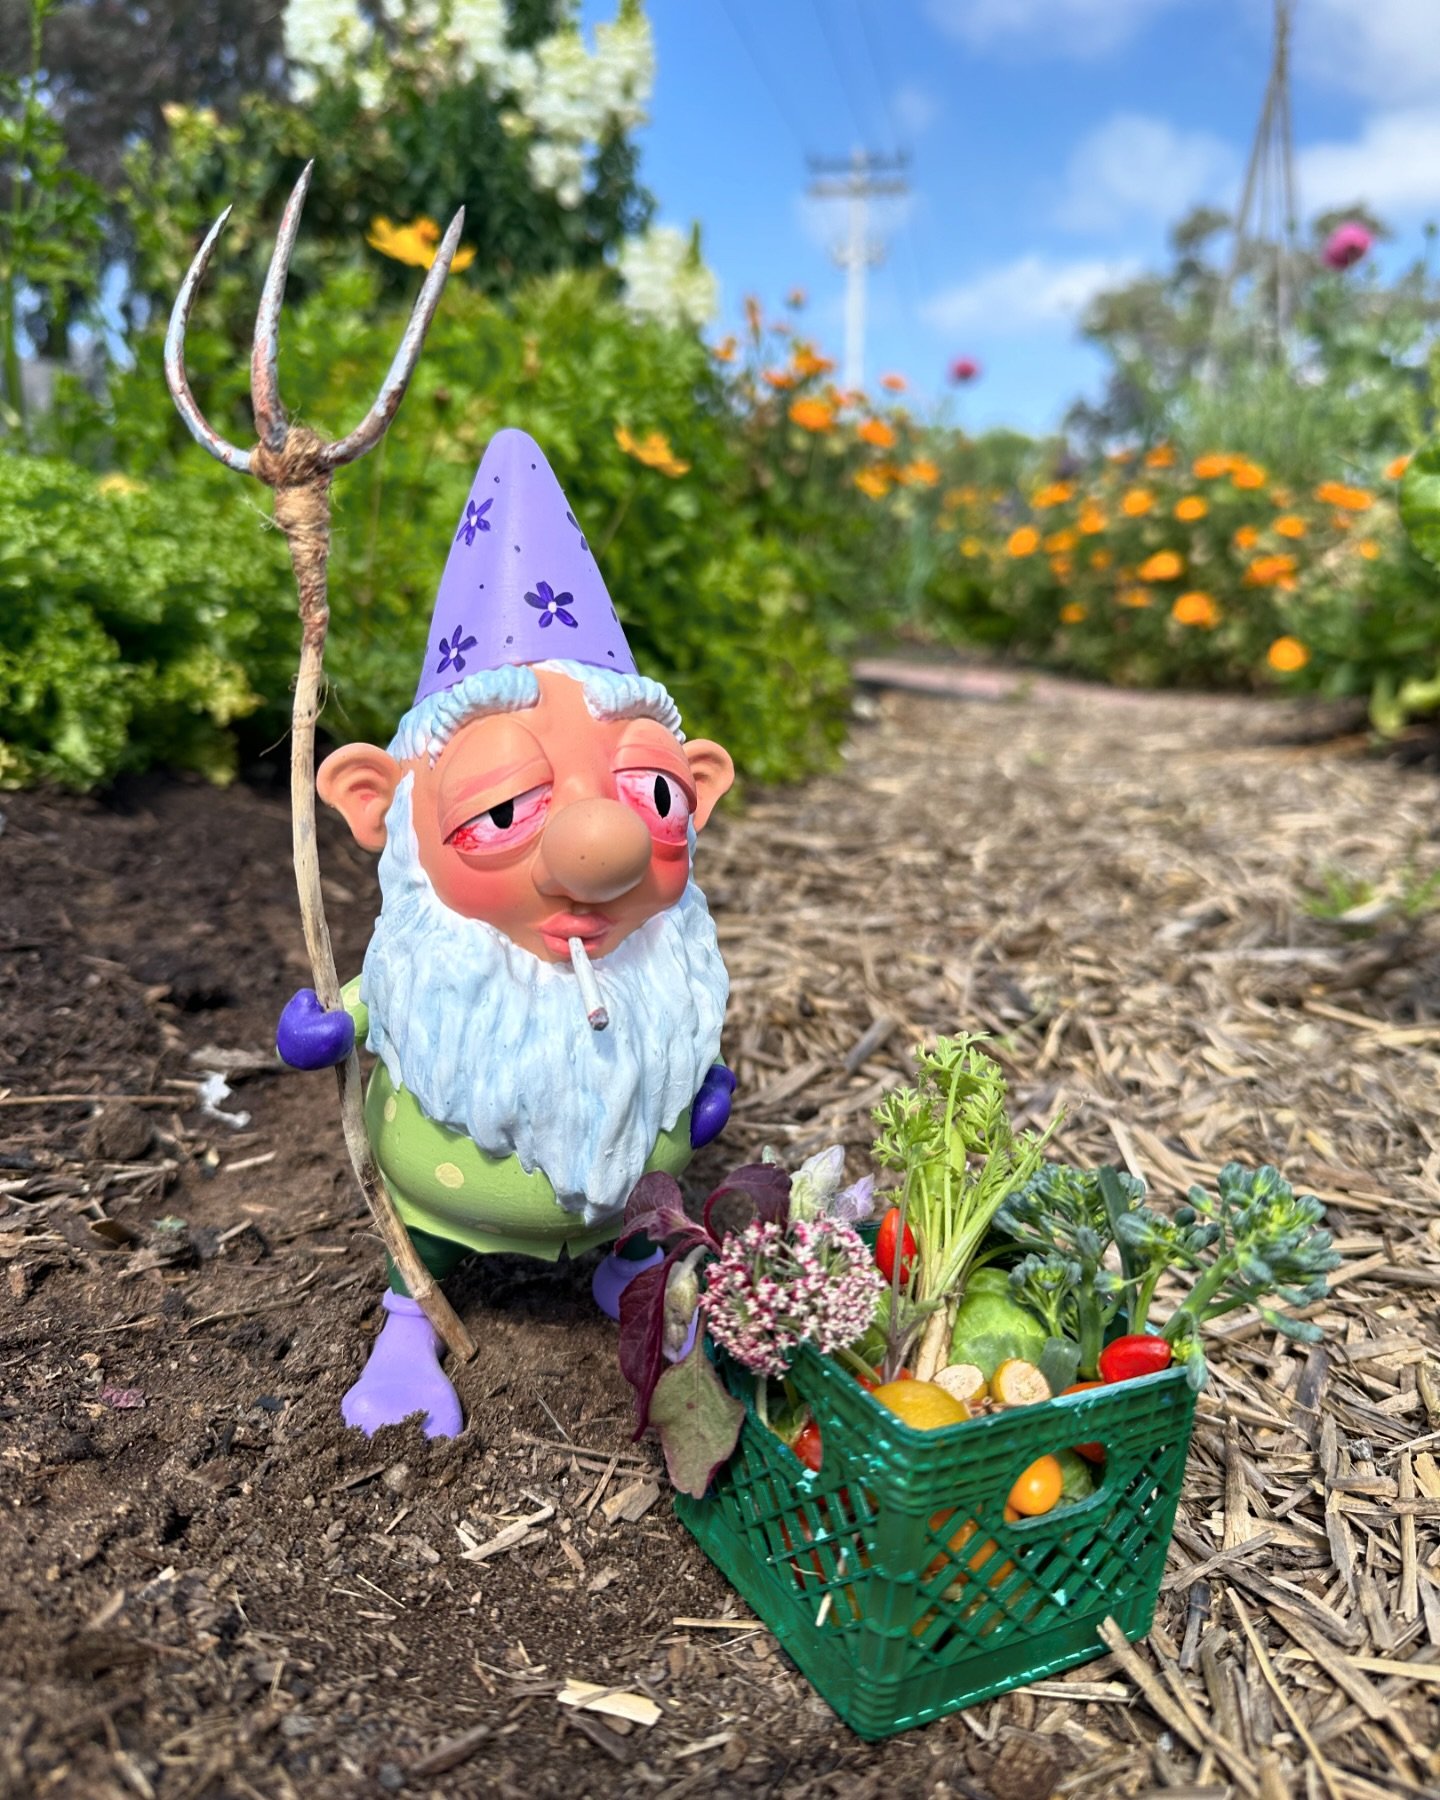 Happy 420 from your neighborhood homie, that Stoney Gnomey with a bountiful mini harvest from @gardenwithfriends 🌻🌿

#bigitup #420 #gardenwithfriends